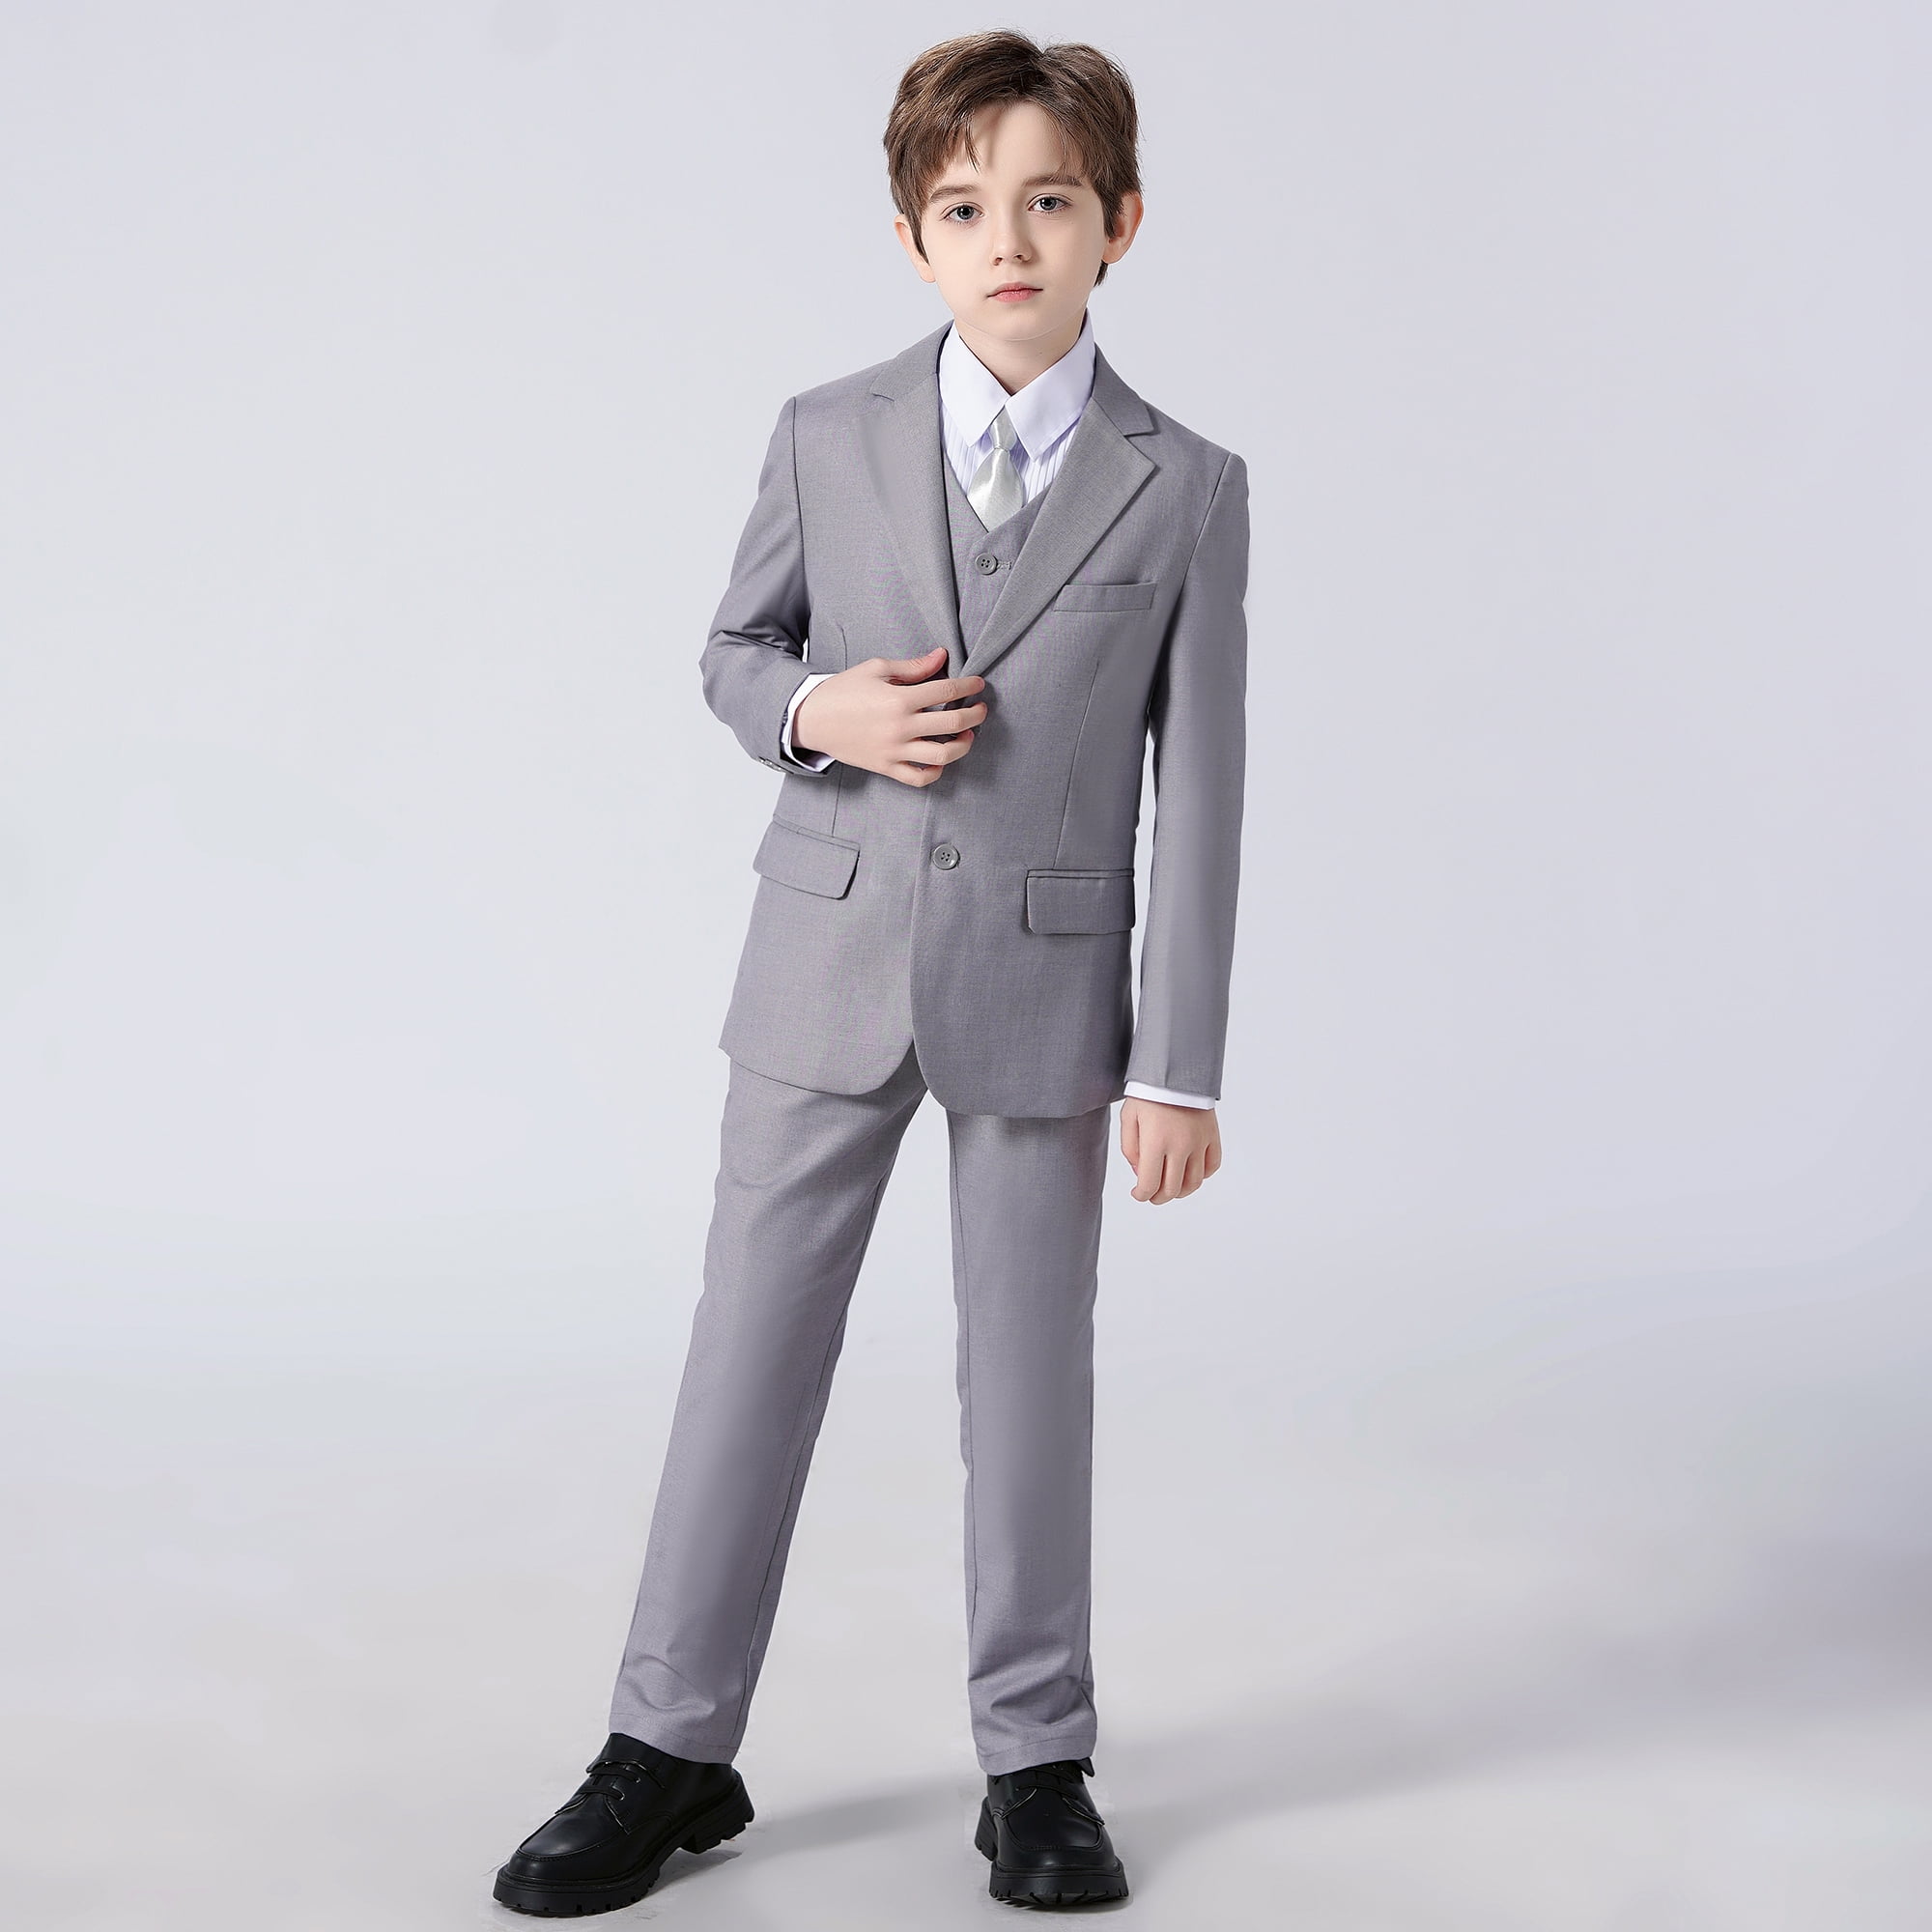 Cotton Black Jodhpuri Suit For Boys, Age Group: 8-10 Years at Rs 810 in  Ahmedabad